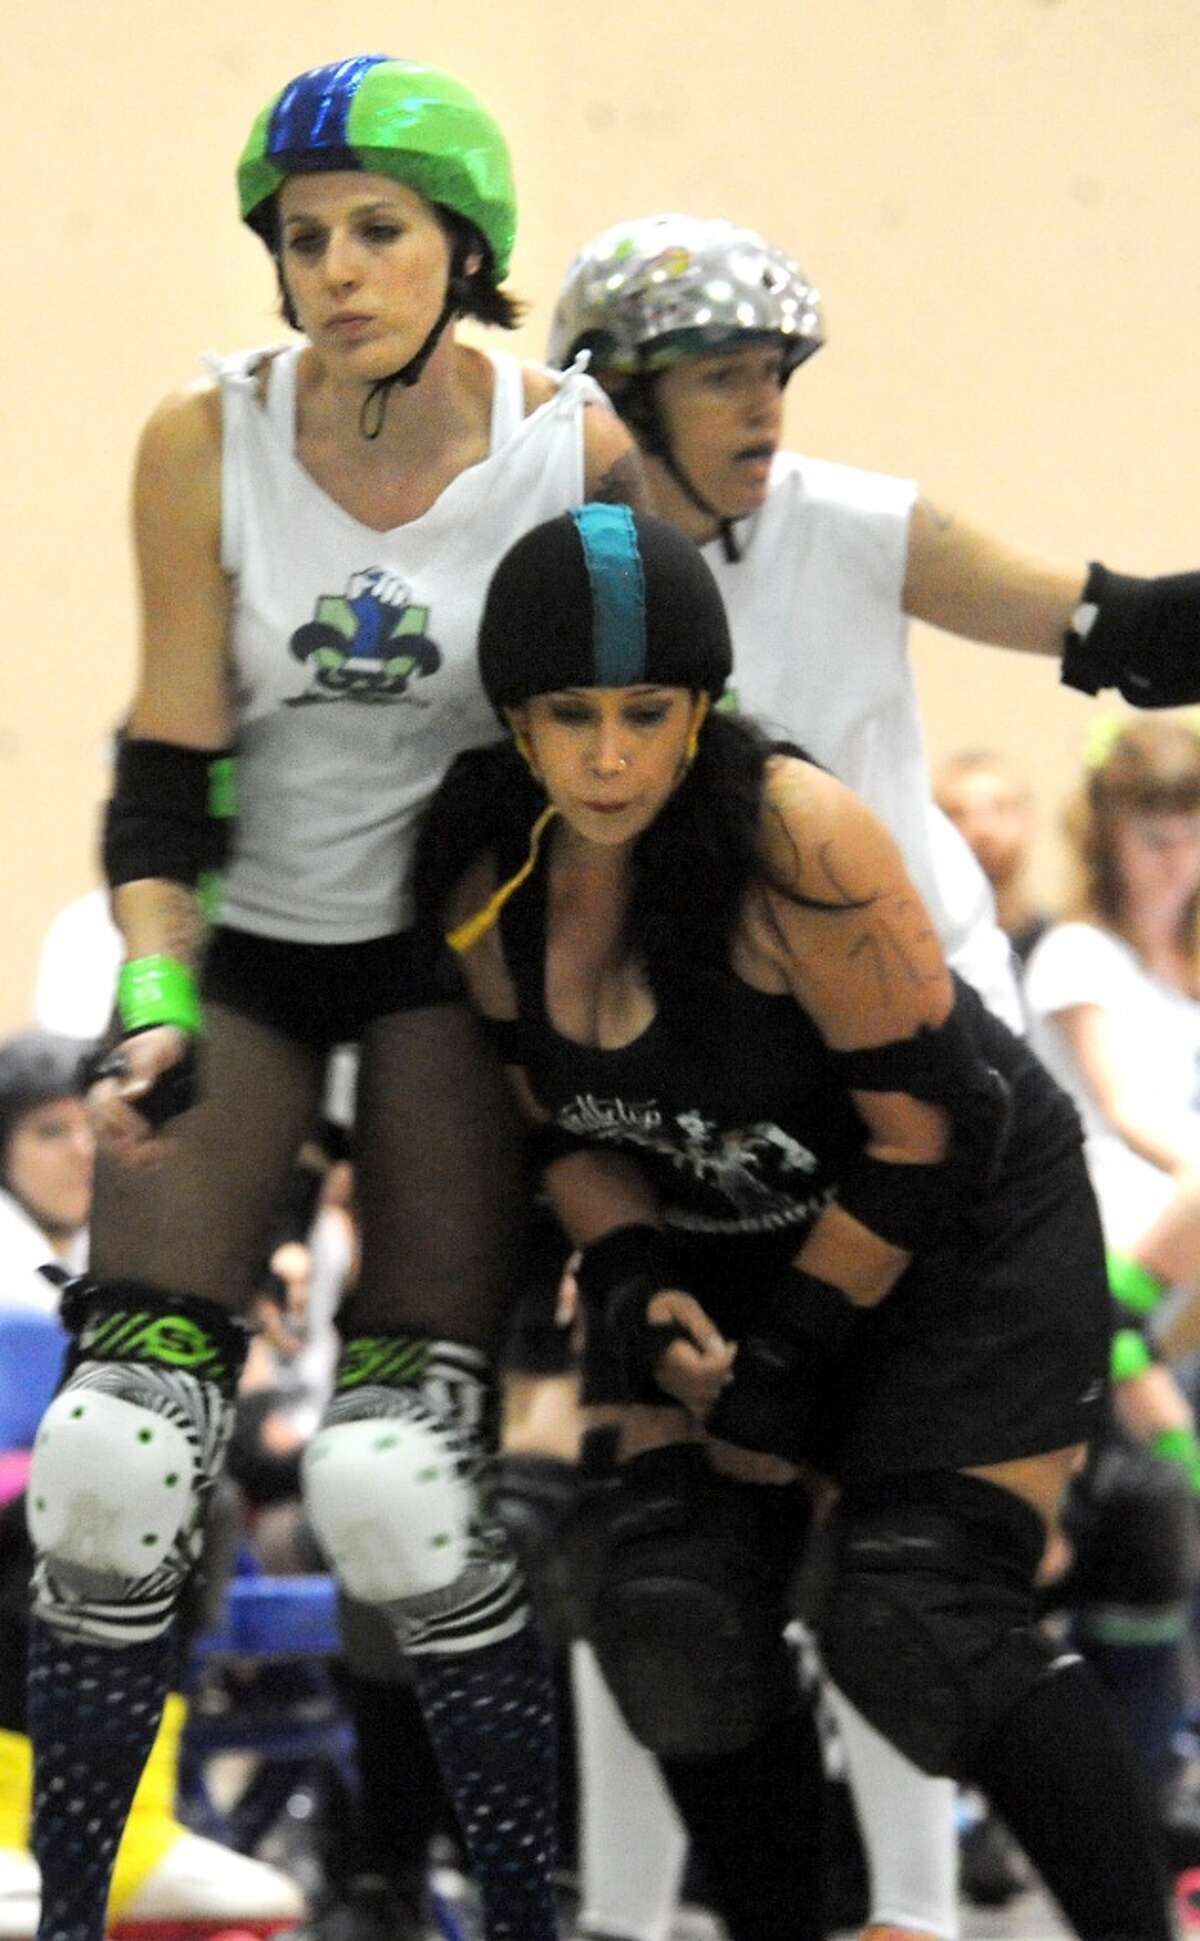 The Spindletop Roller Girls take on the Acadiana Good Times Rollers during the Spindletop Roller Girls first bout of the first season at Ford Exhibit Hall in Beaumont, Sunday. Tammy McKinley/ The Enterprise